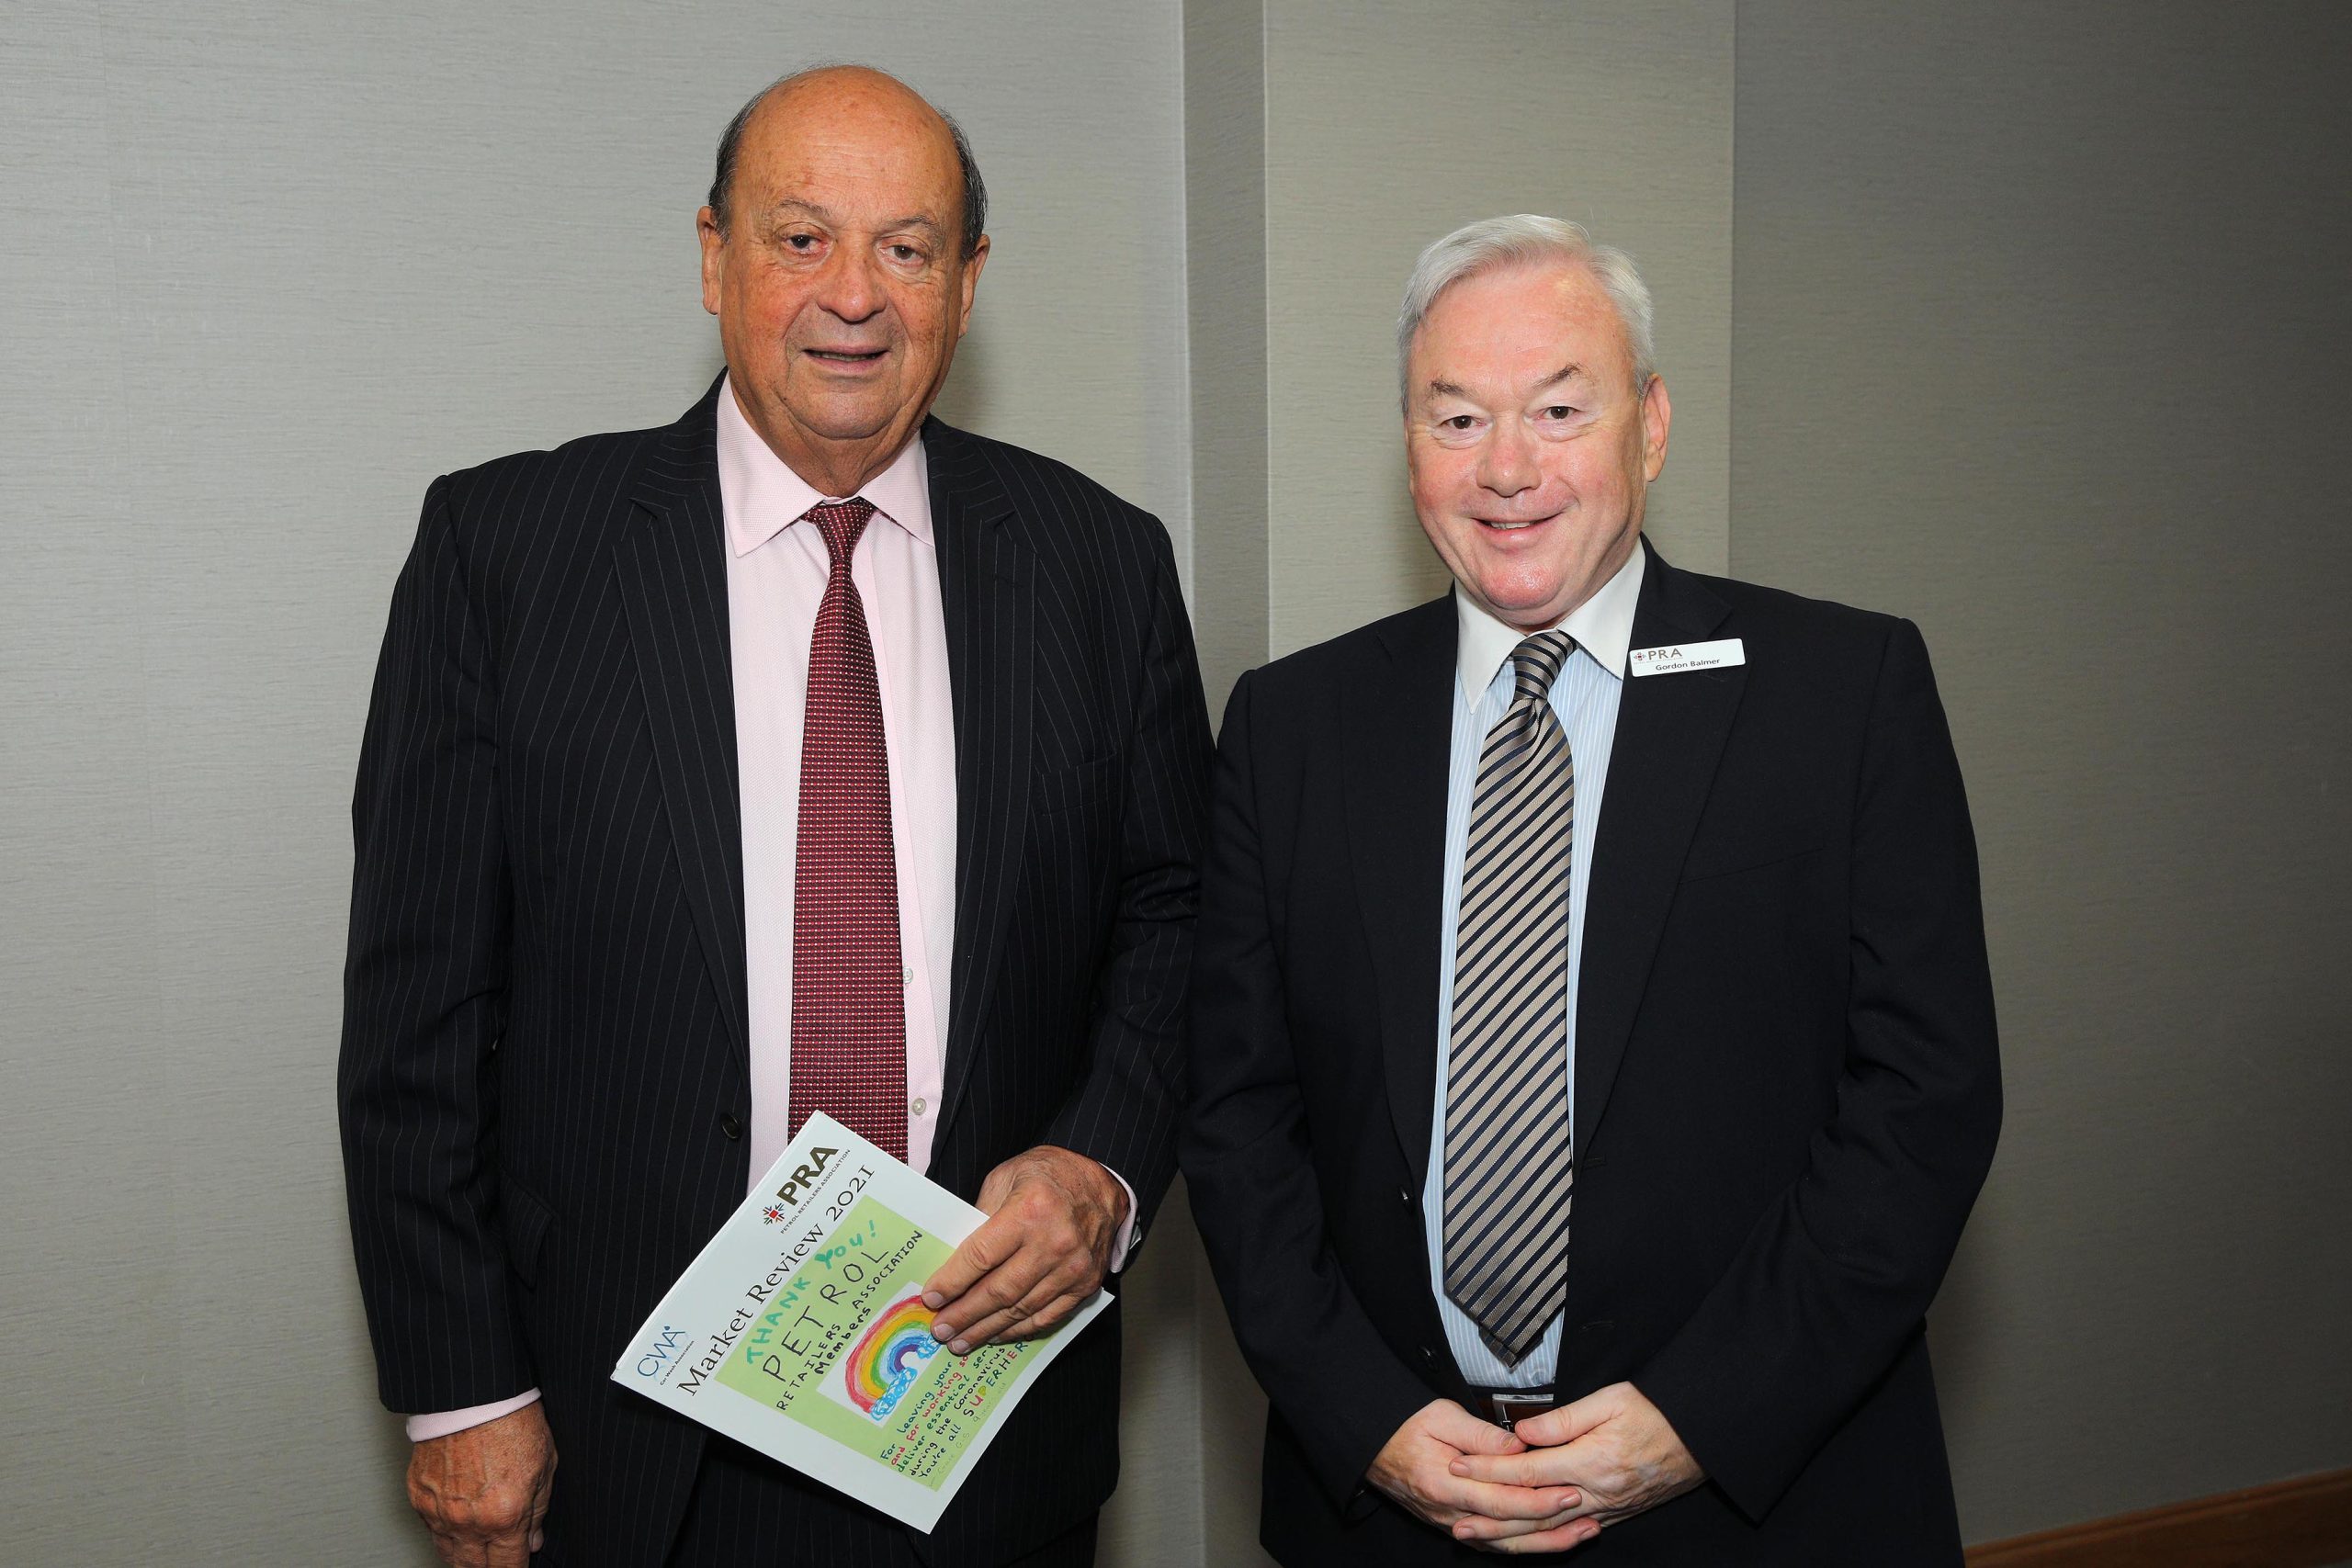 End of an era as Brian Madderson retires from Petrol Retailers Association